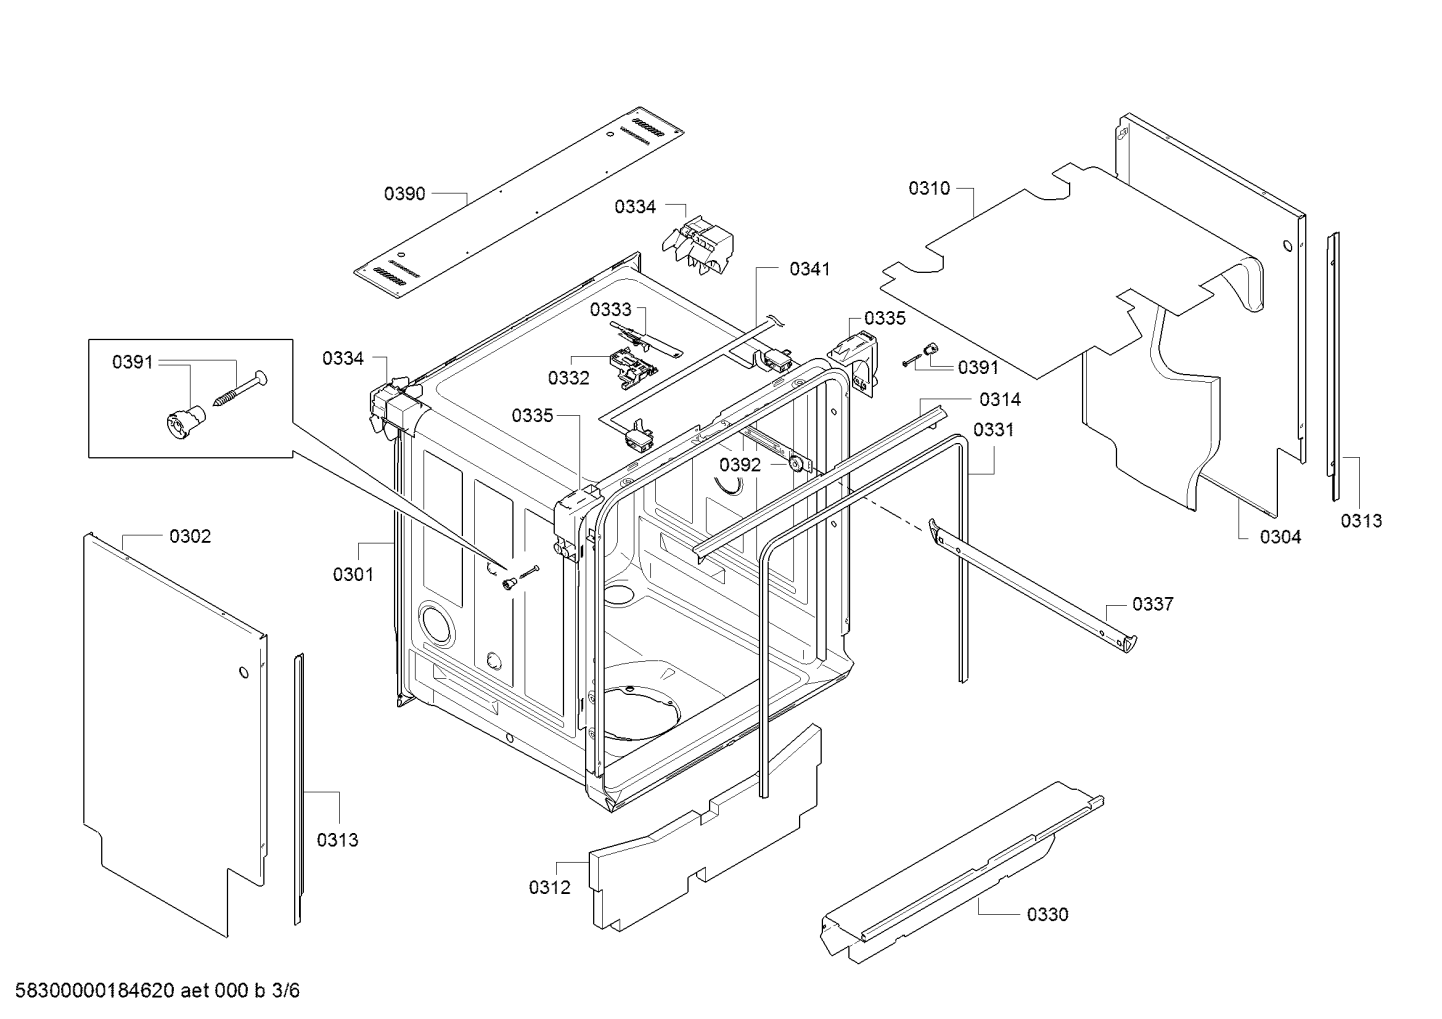 drawing_link_3_device_1768109